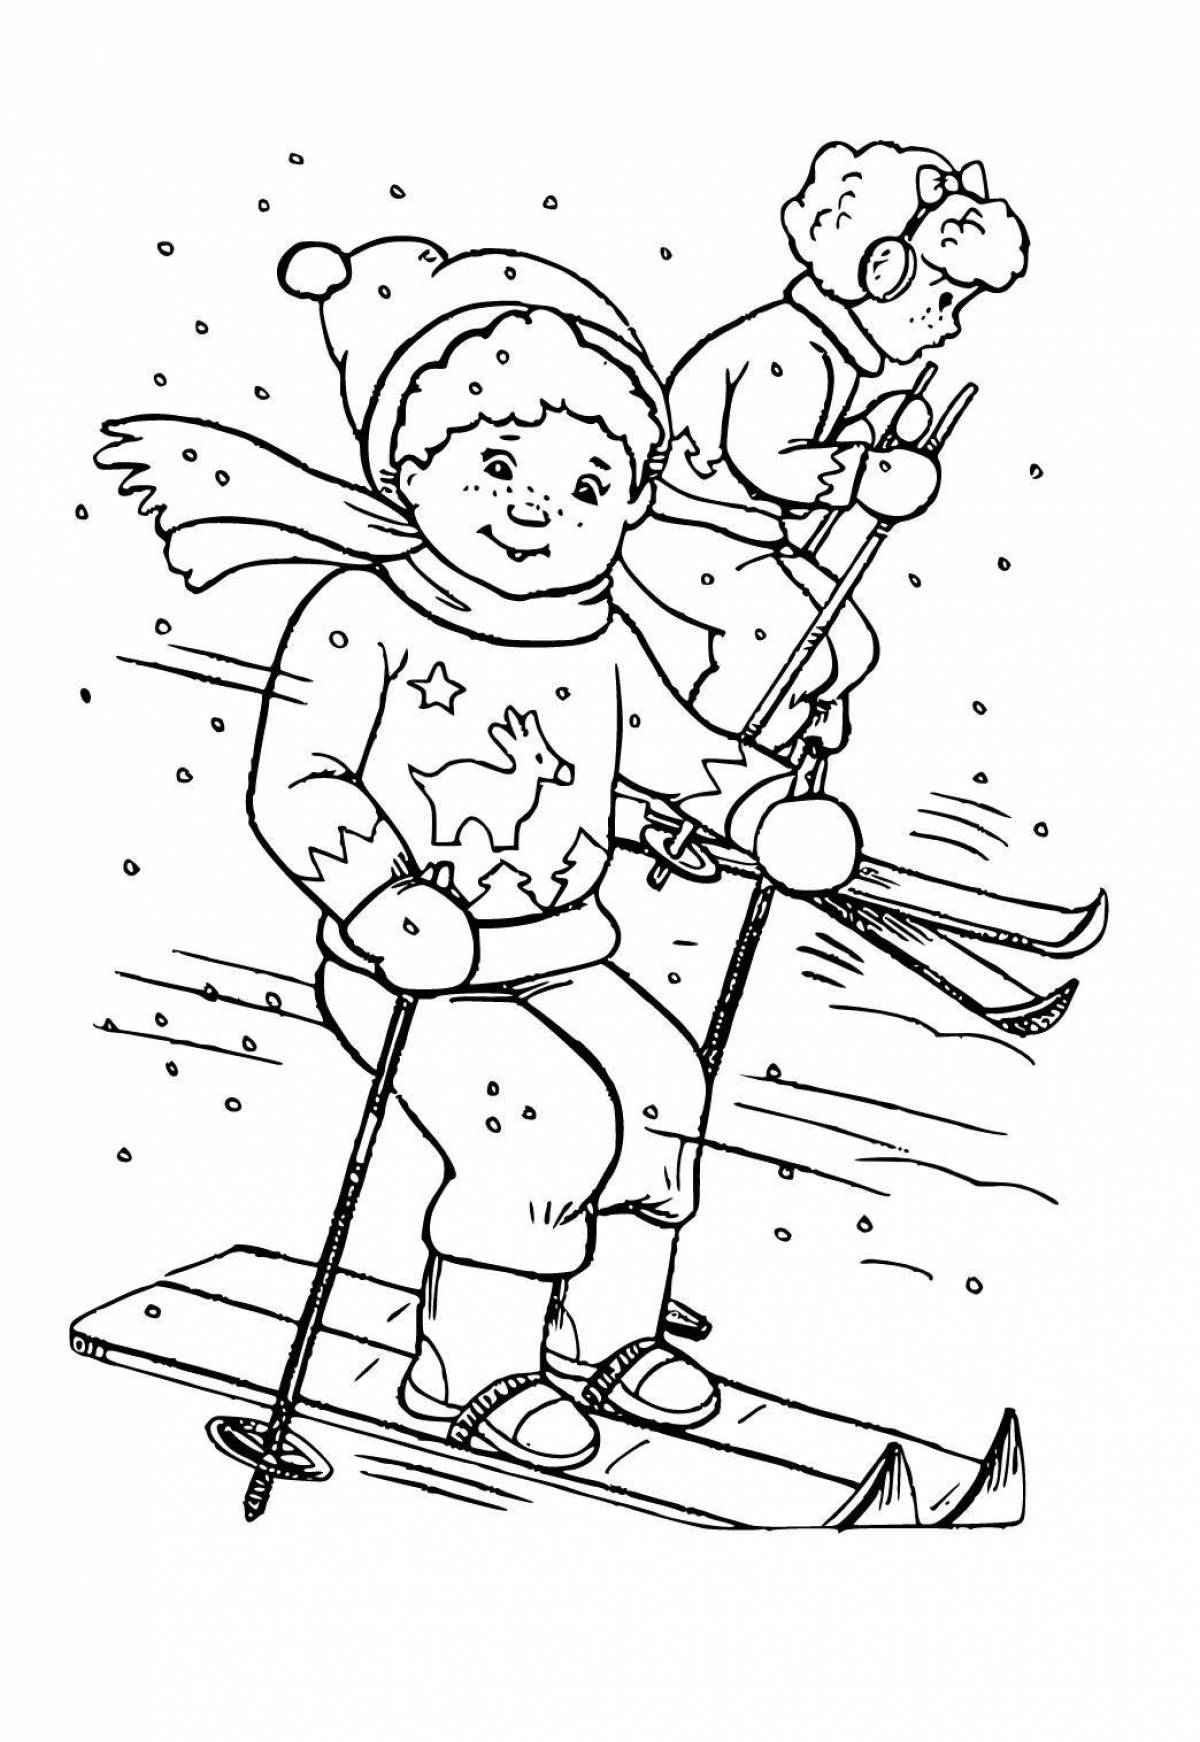 Amazing skis for kids